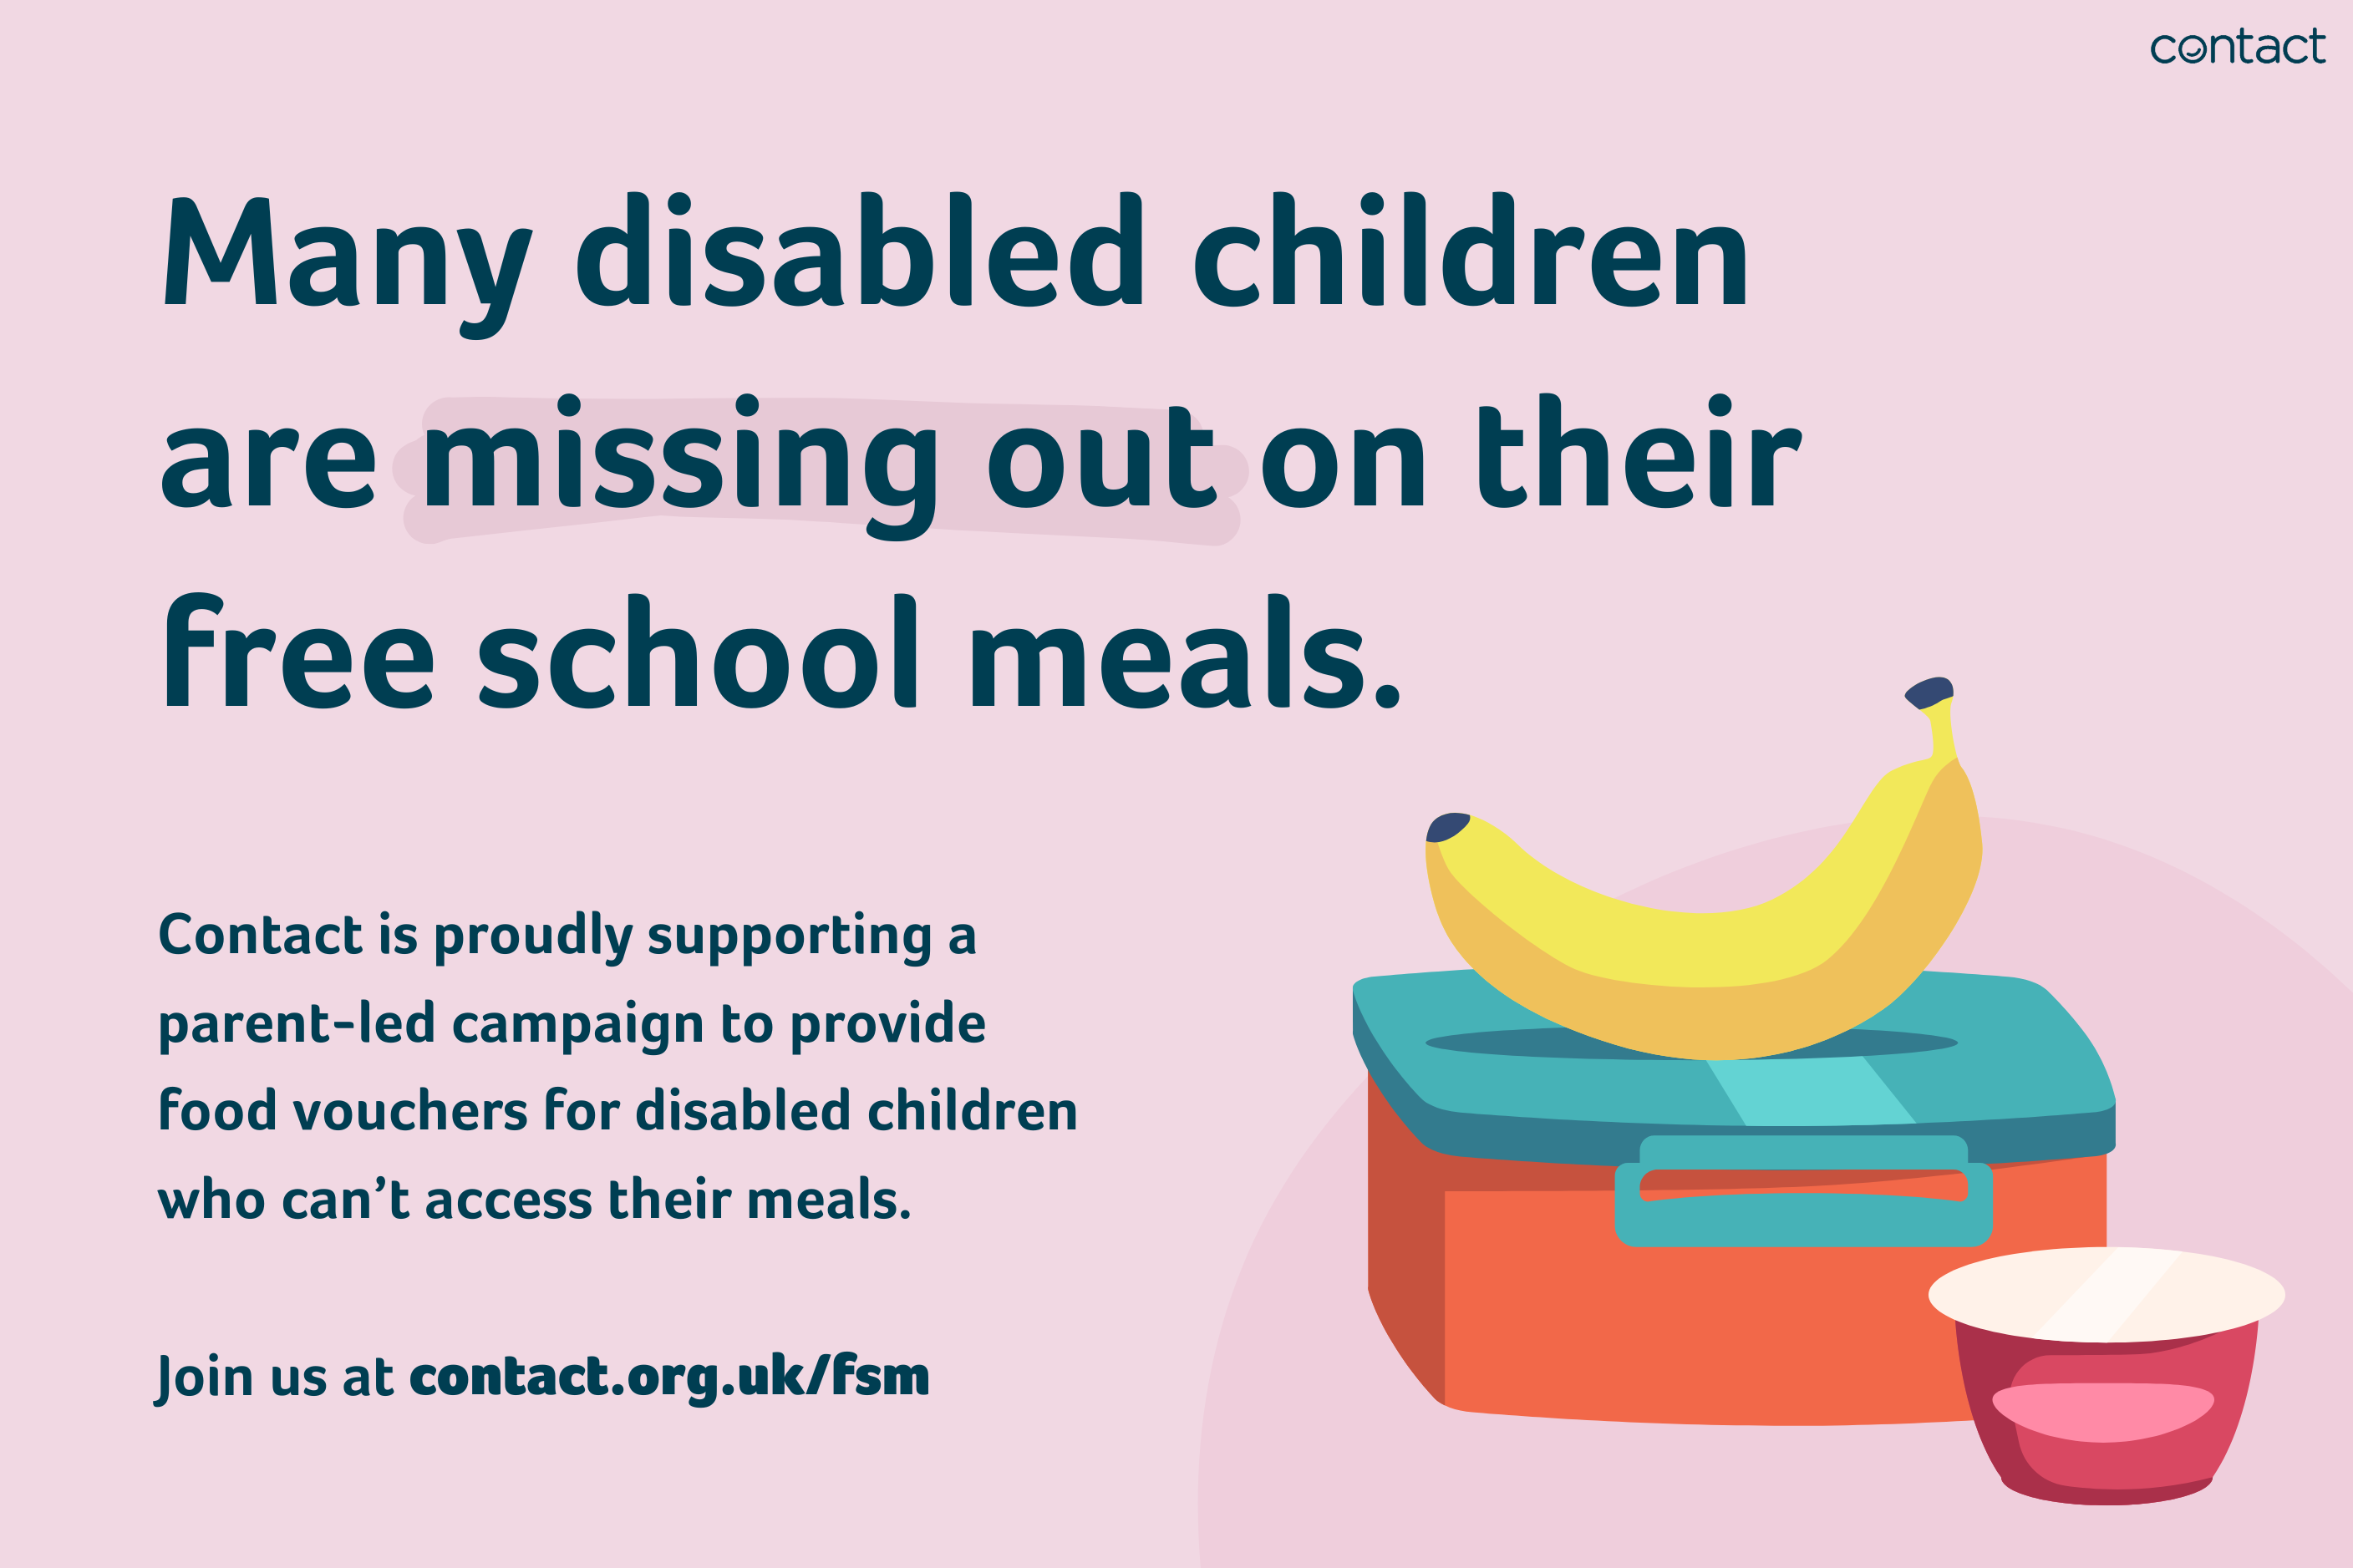 Many disabled children are missing out on their free school meals. Contact is proudly supporting a parent-led campaign to provide food vouchers for disabled children who can’t access their meals. Join us at contact.org.uk/fsm